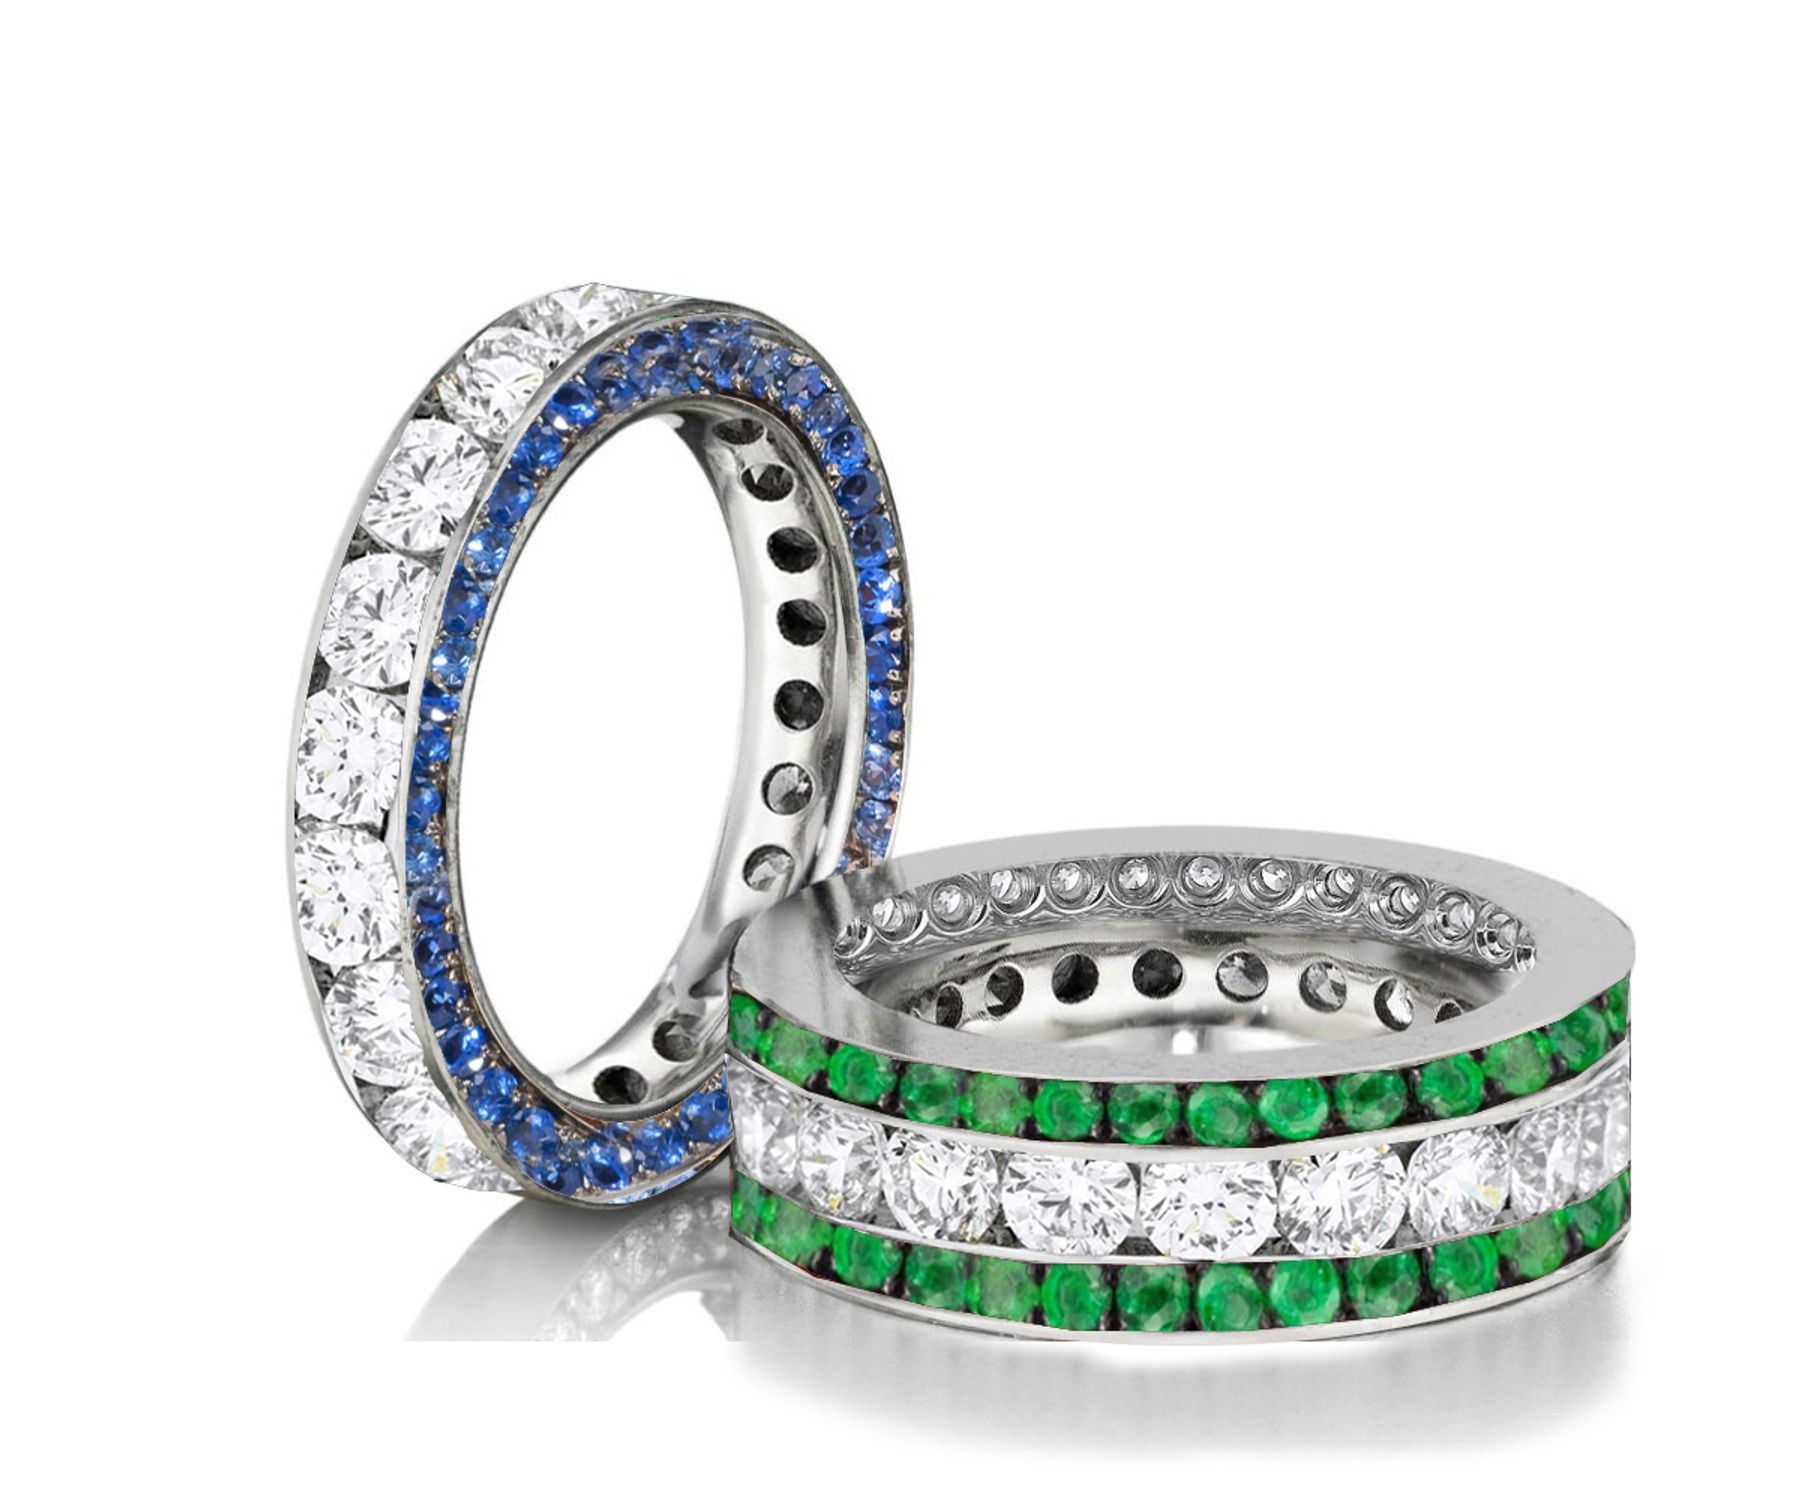 Made to Order Channel Set Brilliant Cut Round Diamonds, Emeralds & Blue Sapphires Set Eternity Rings & Stackable Bands